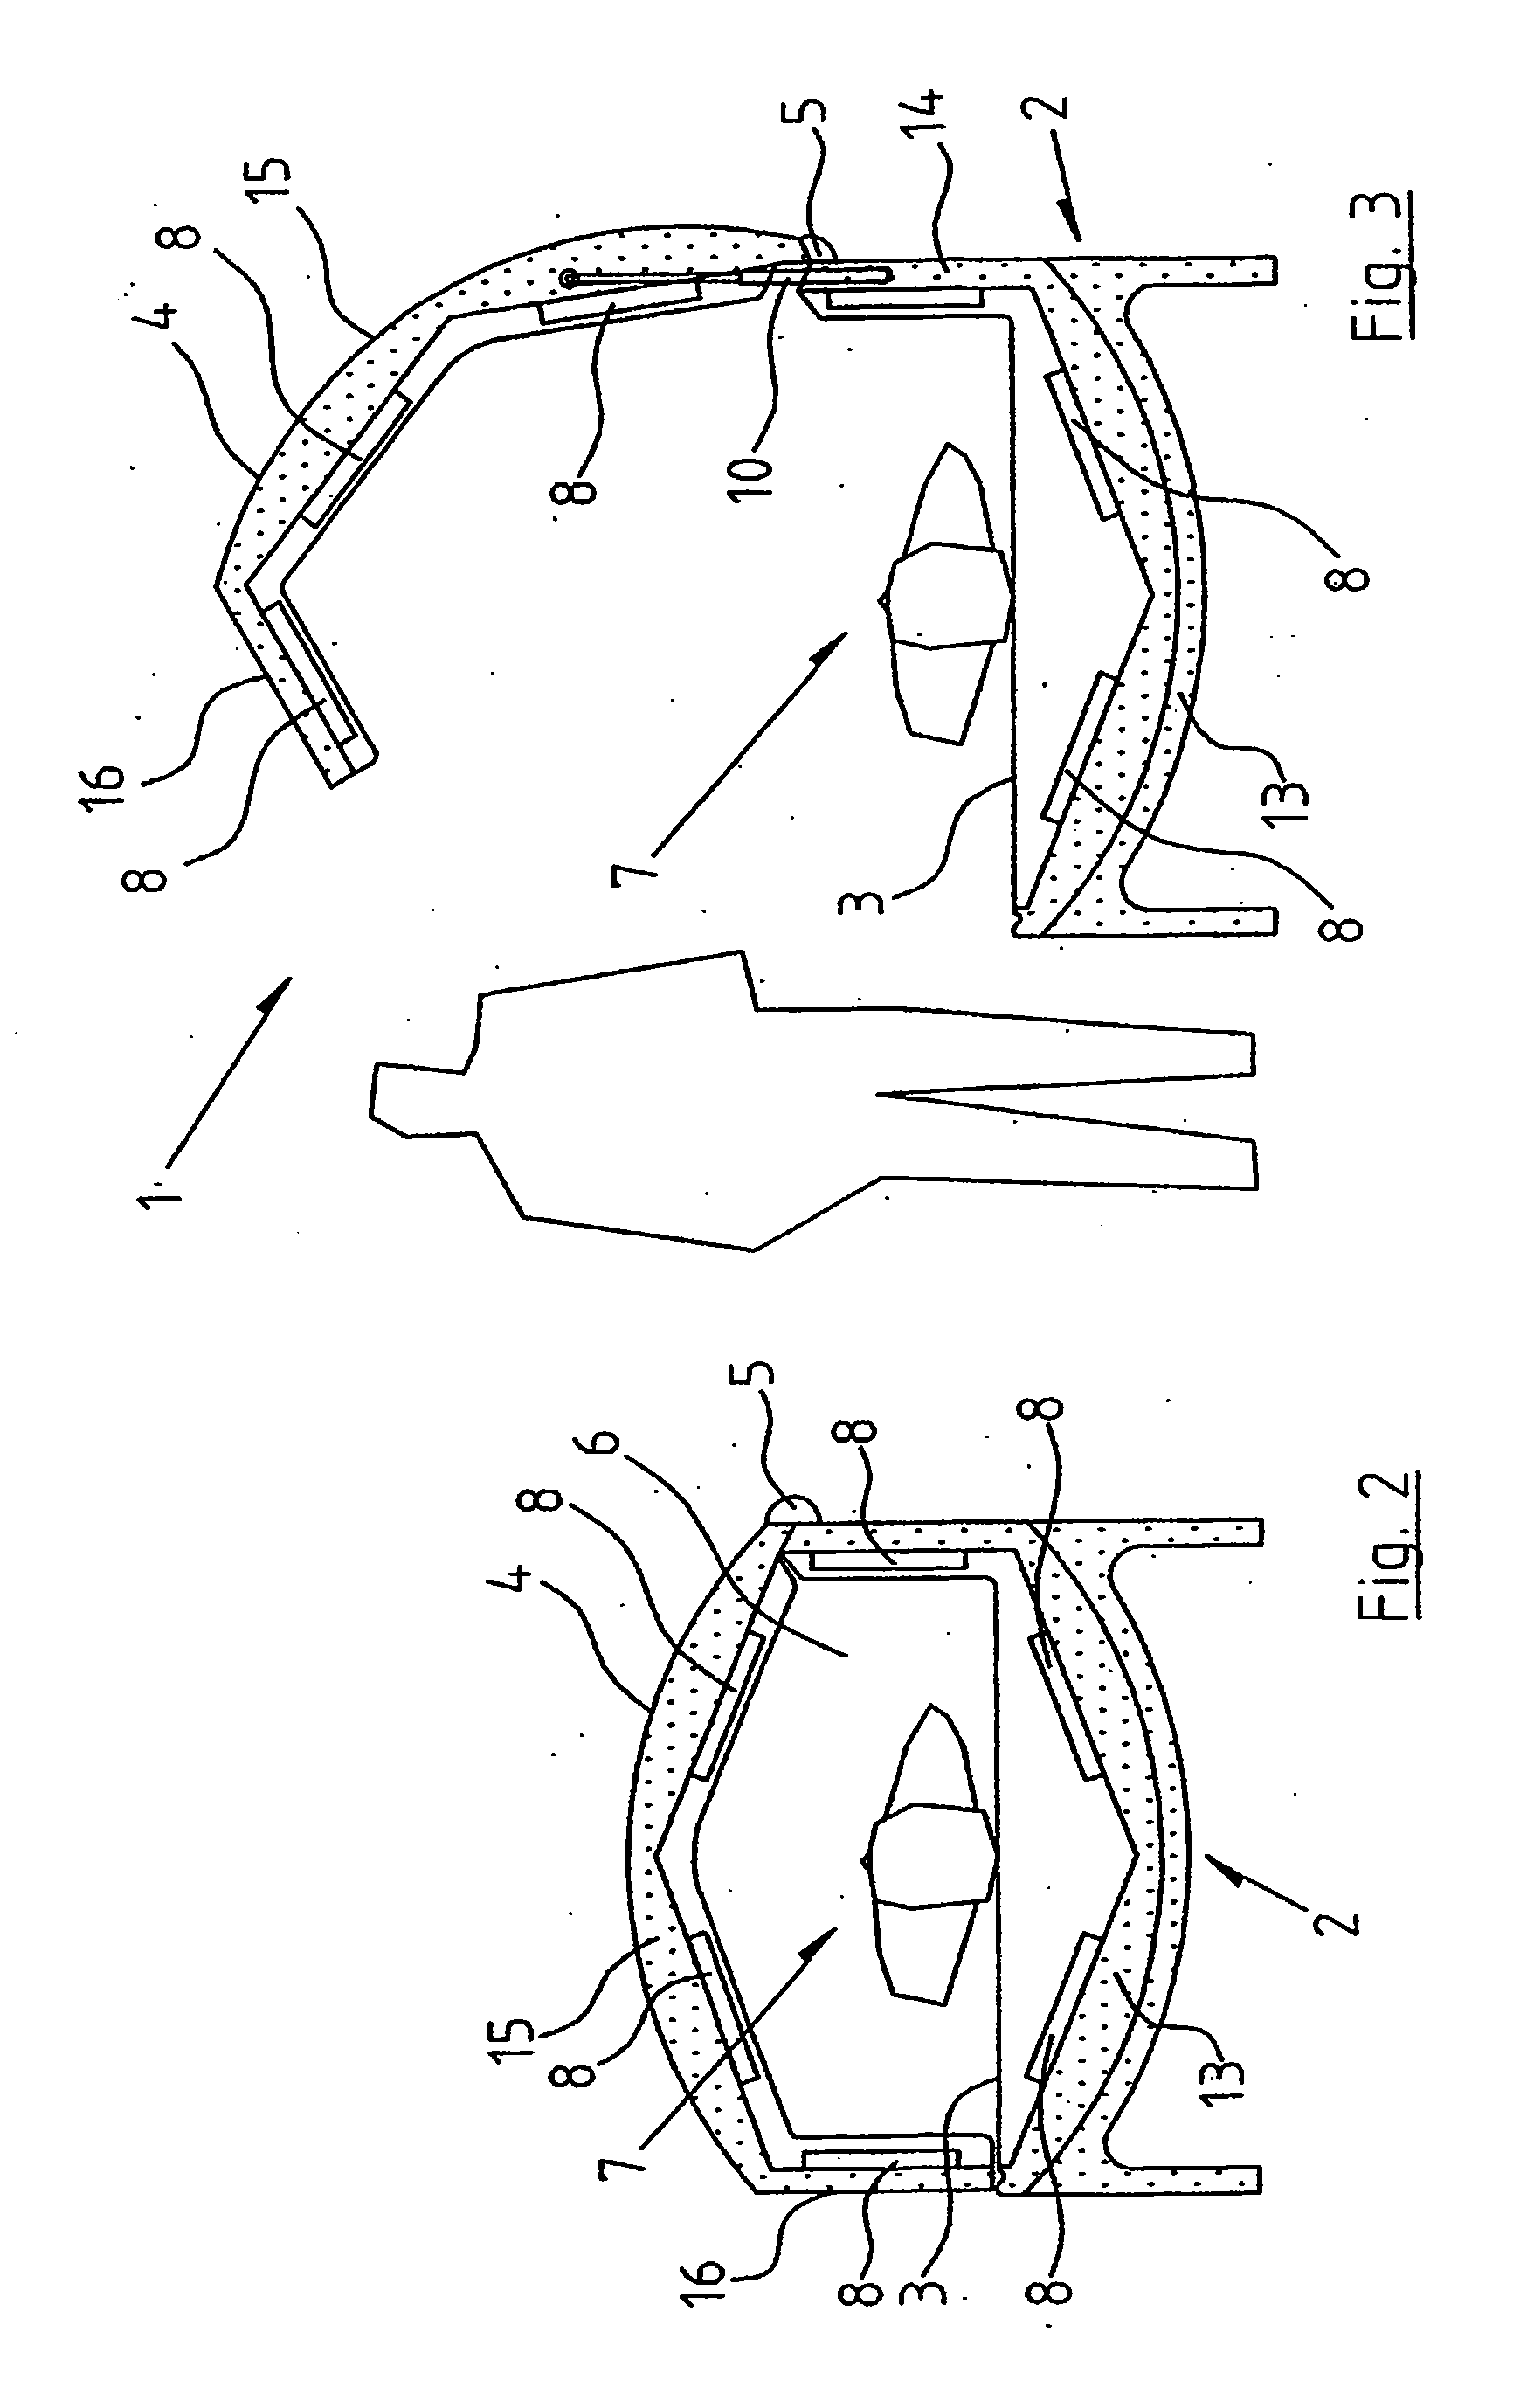 Apparatus for Photodynamic Therapy